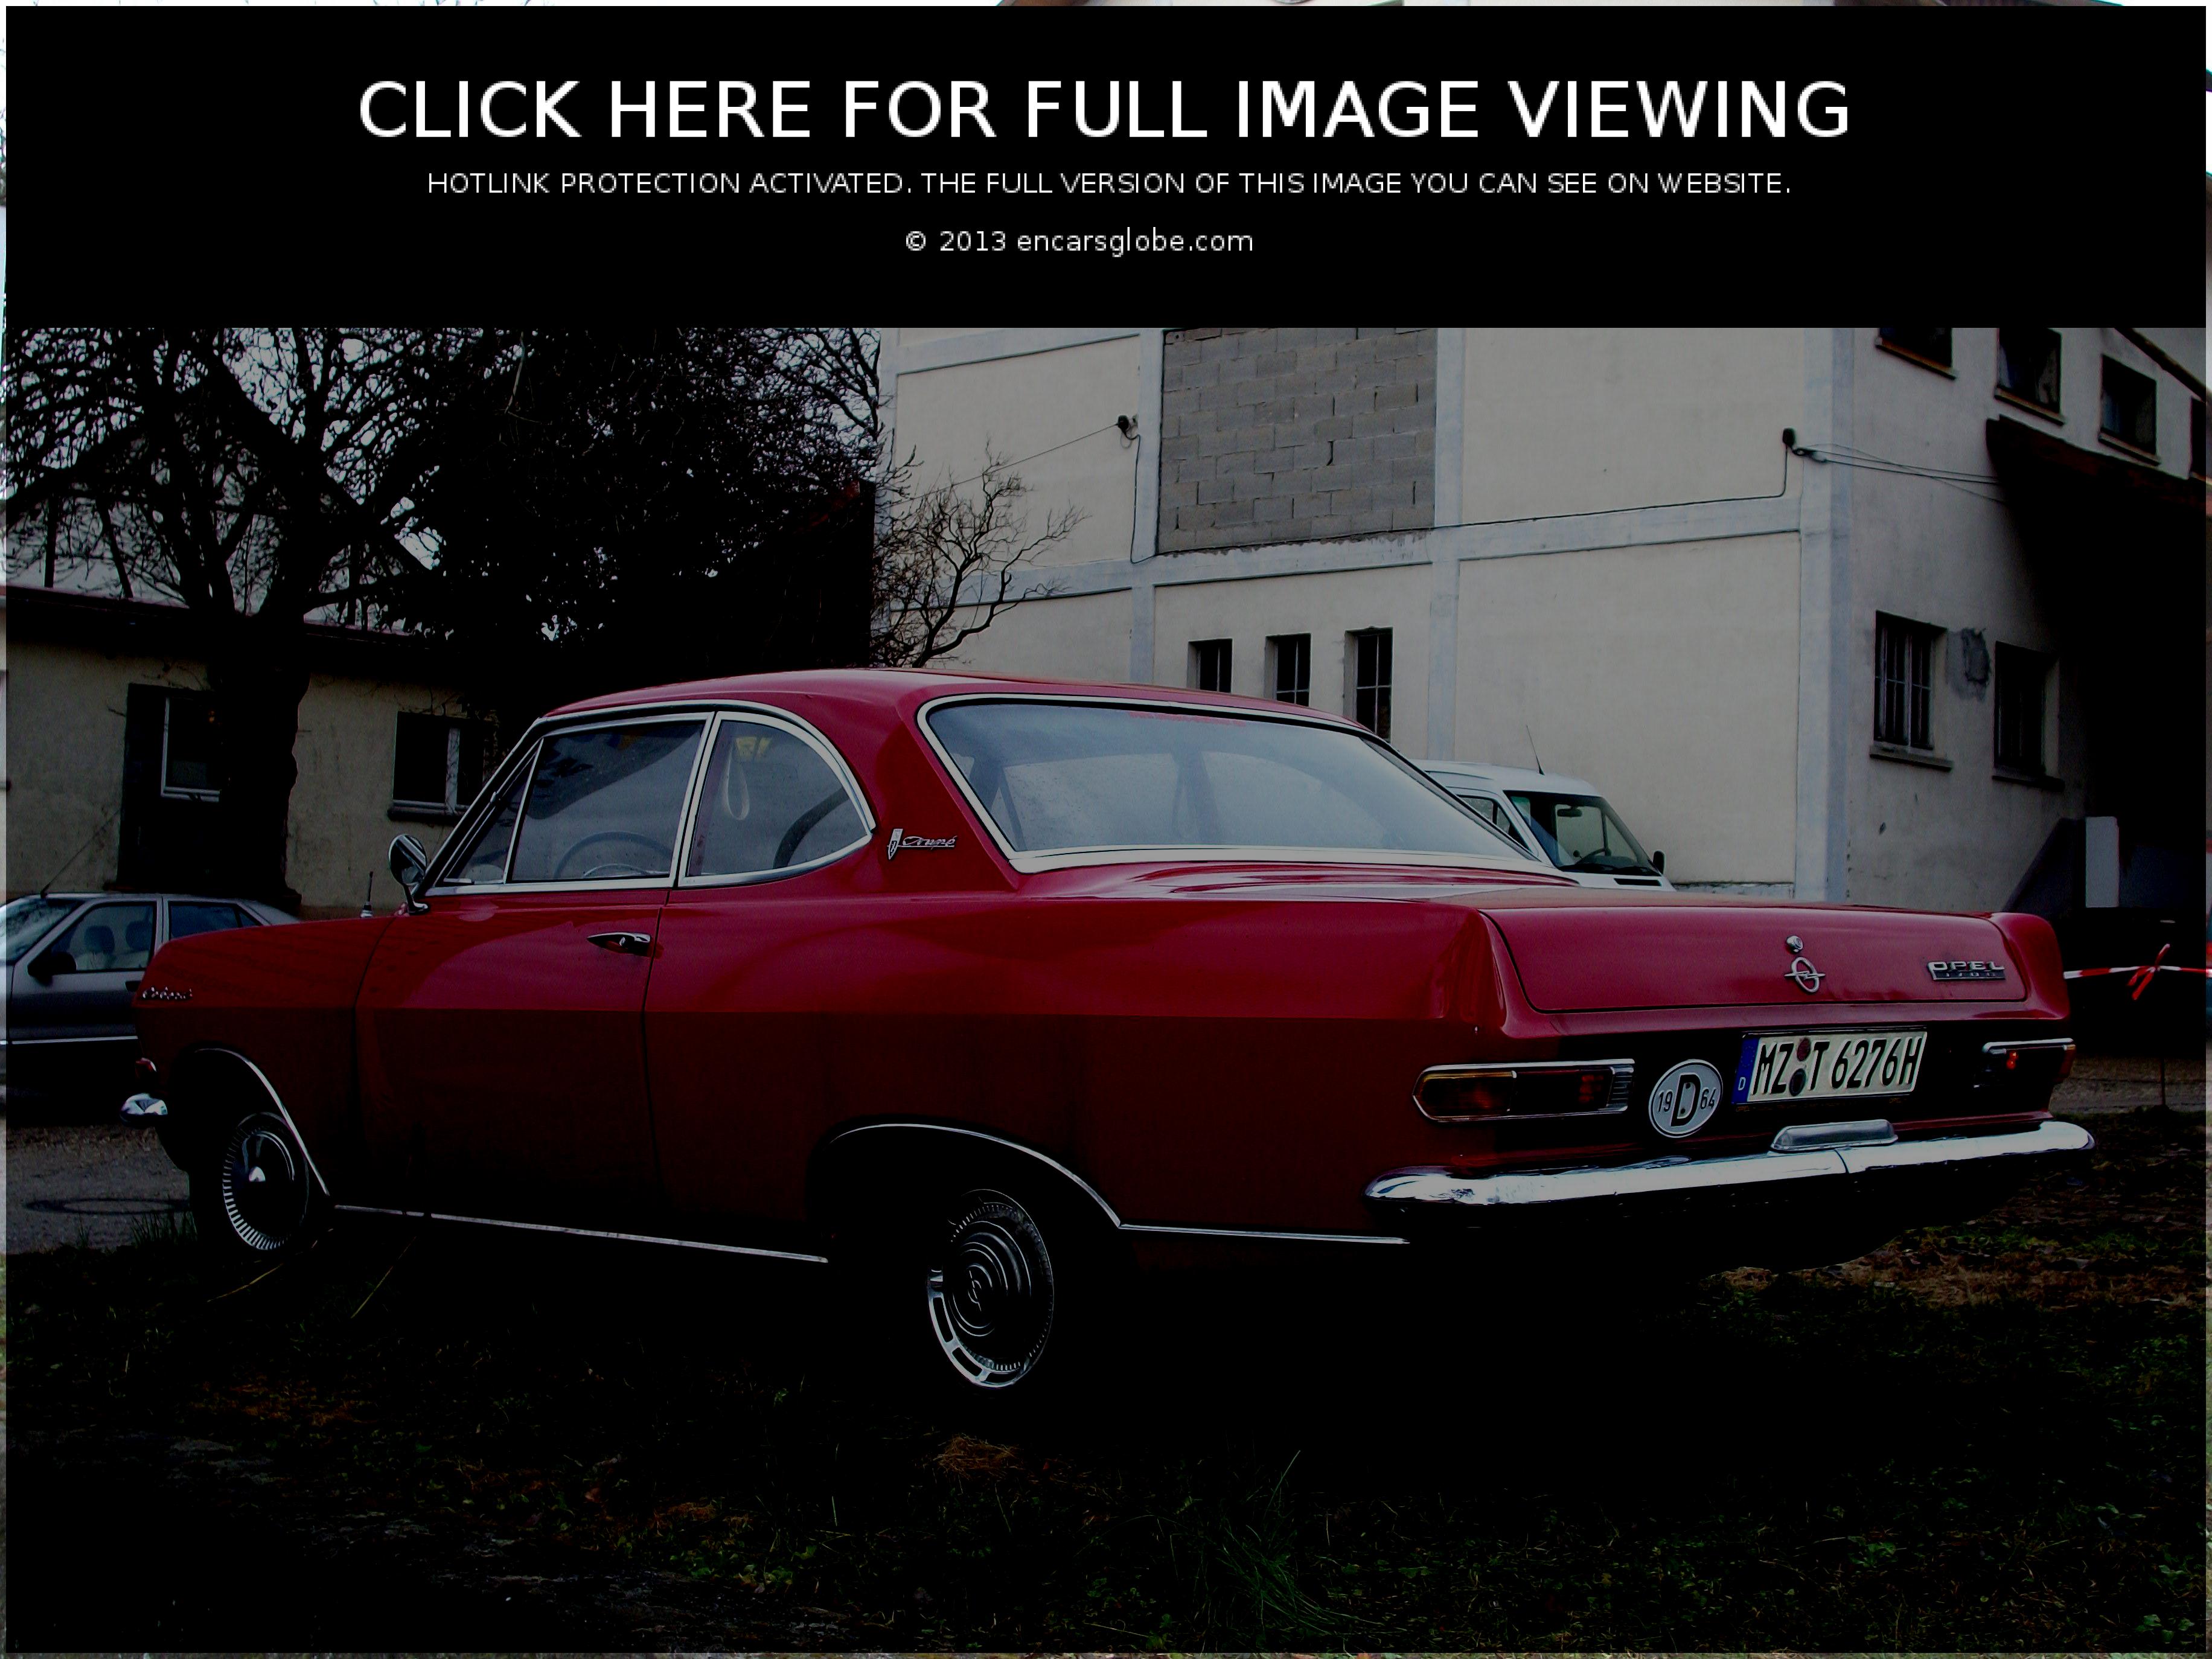 Opel Rekord 1700 Coupe (02 image) Size: 3664 x 2748 px | image/jpeg | 49475